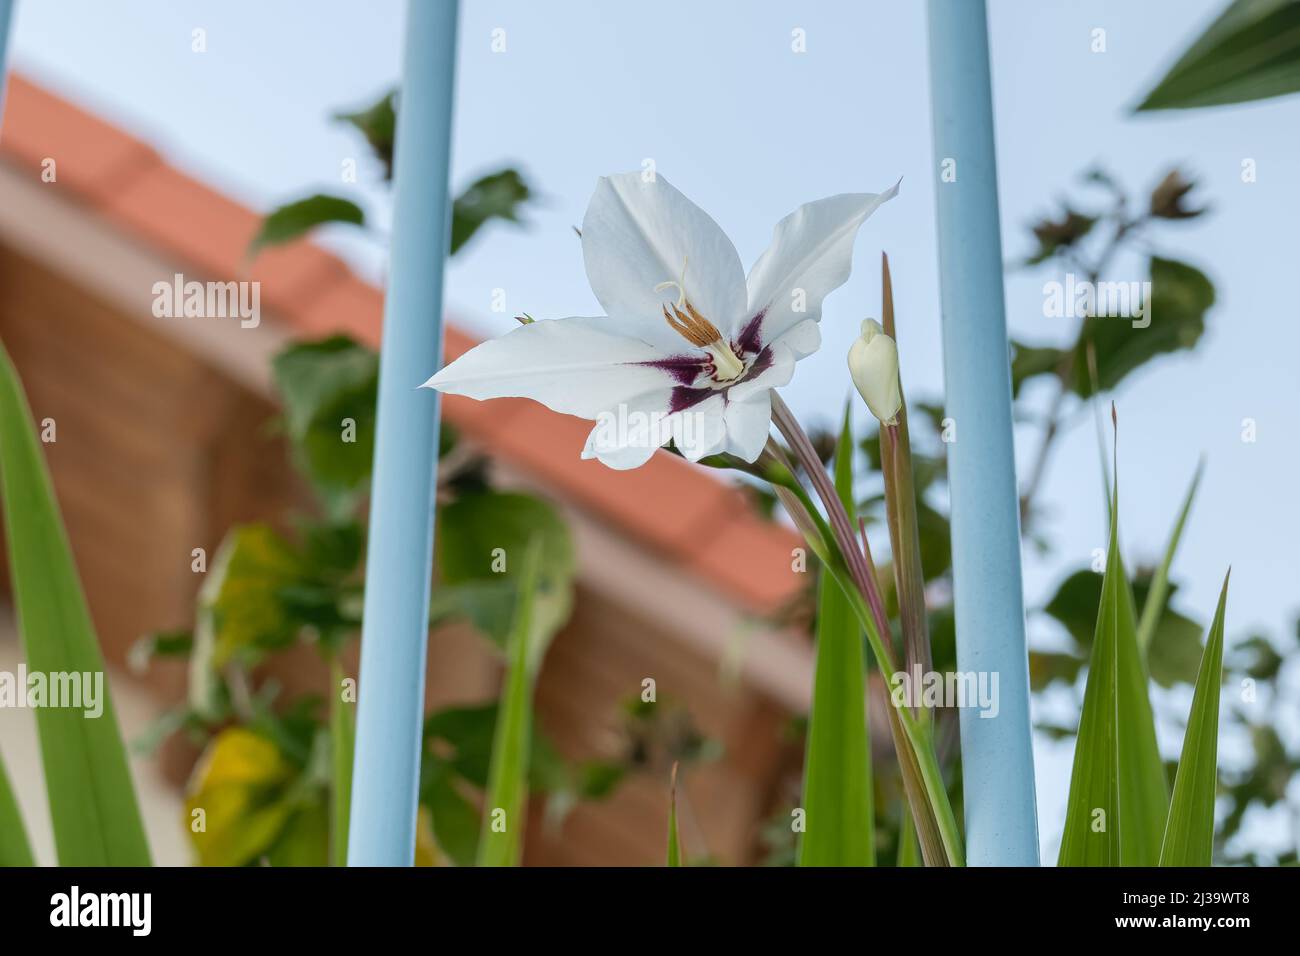 flower and bulb of acidanthera plant close up view Stock Photo